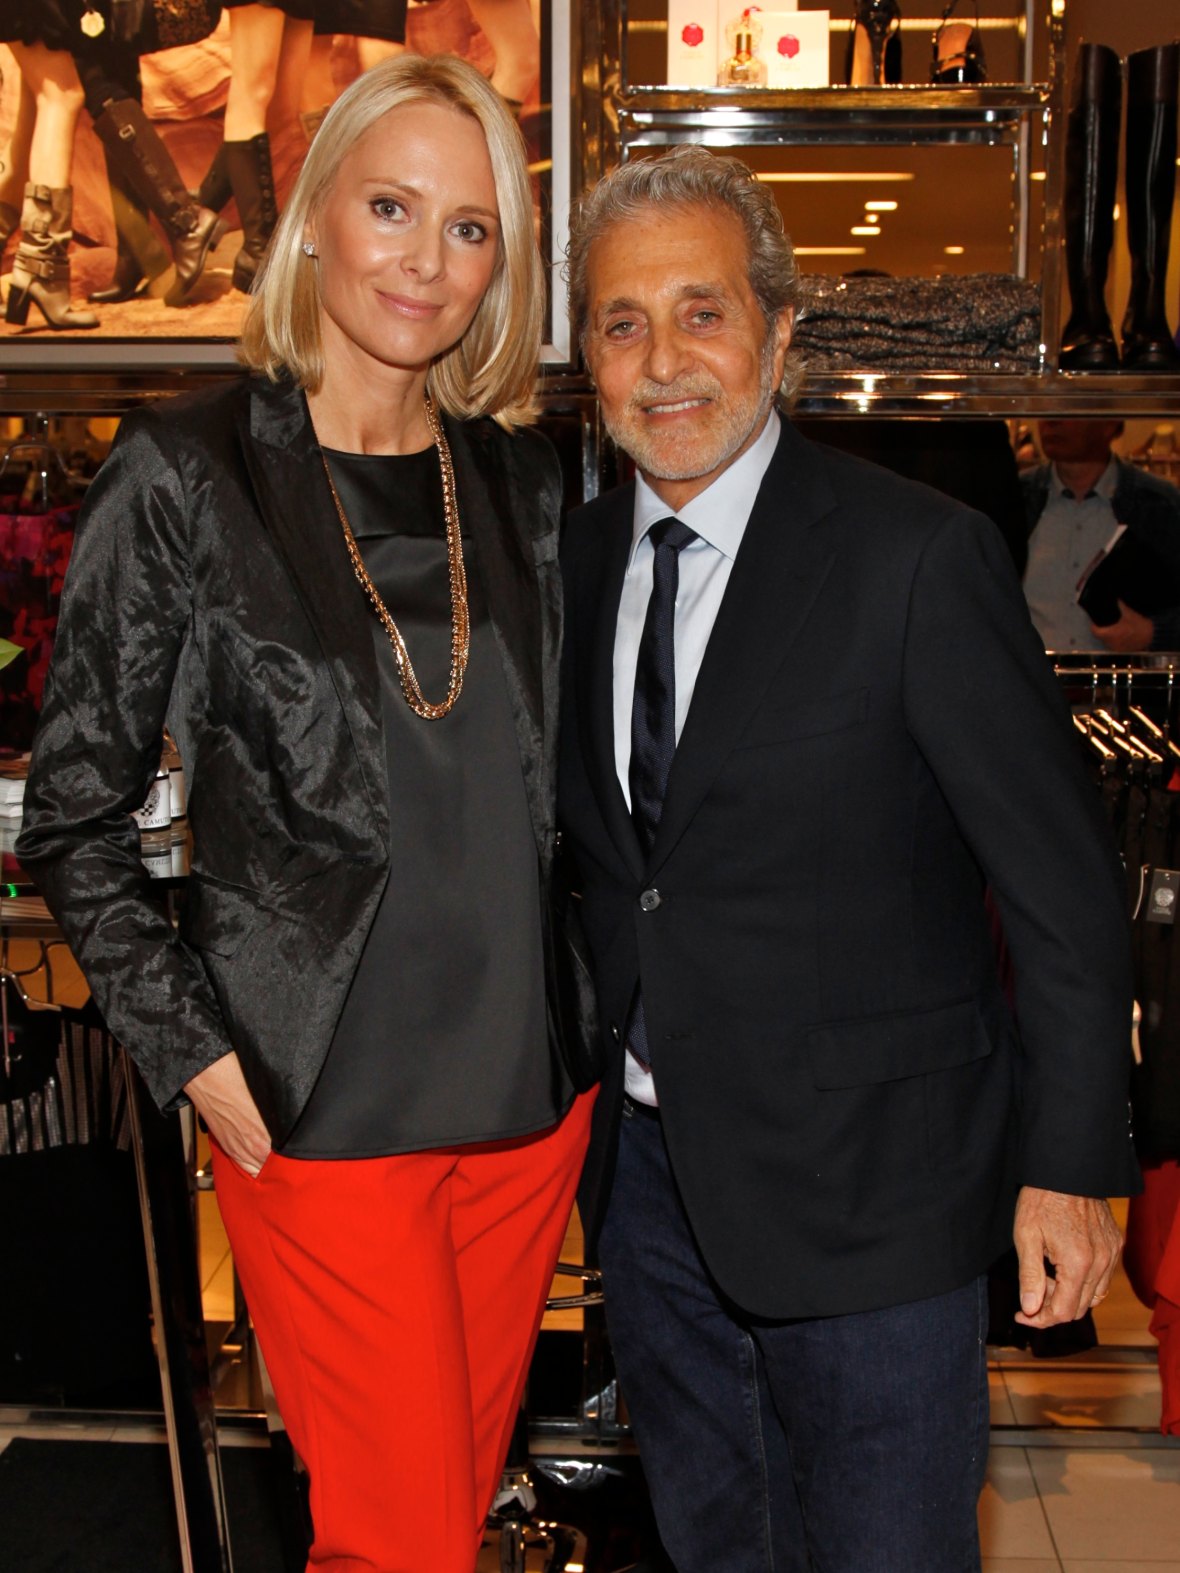 Vince Camuto Dead: Shoe Designer Dies at 78 – The Hollywood Reporter